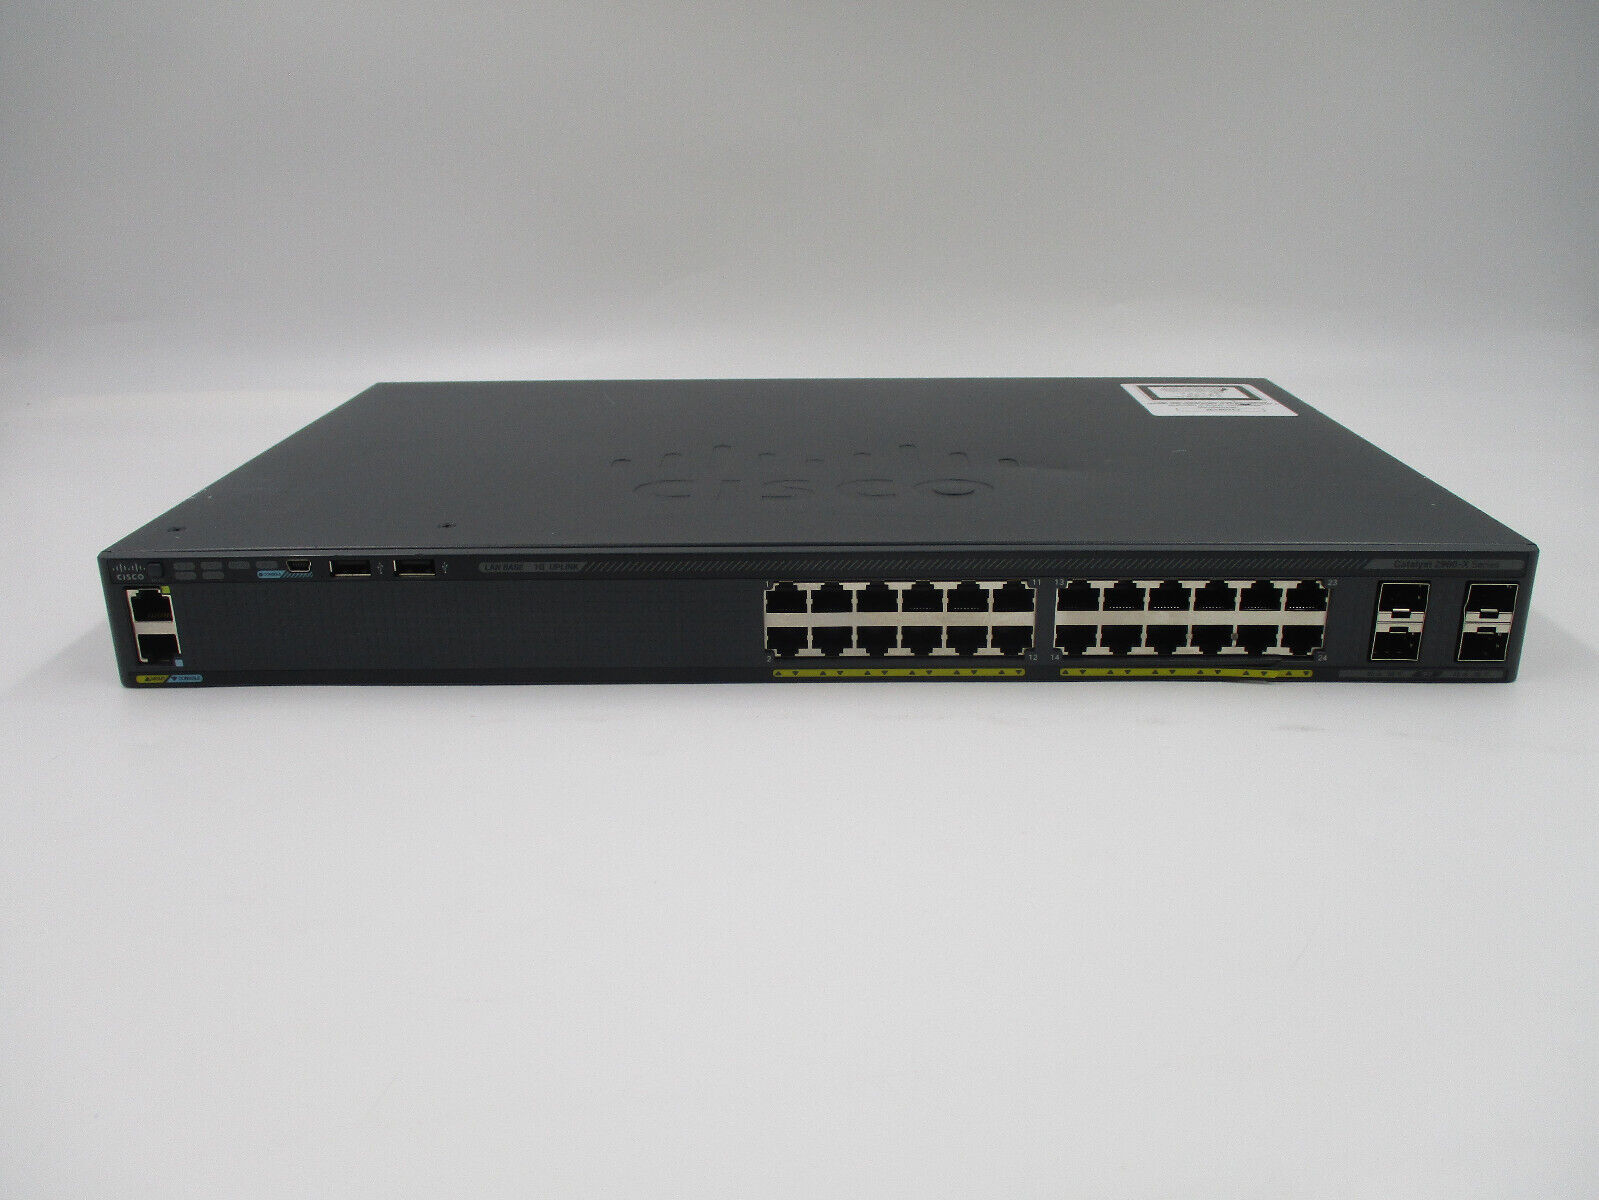 Cisco Catalyst 2960-X Series  WS-C2960X-24TS-L 24xPort 1G 4xSFP Tested Working